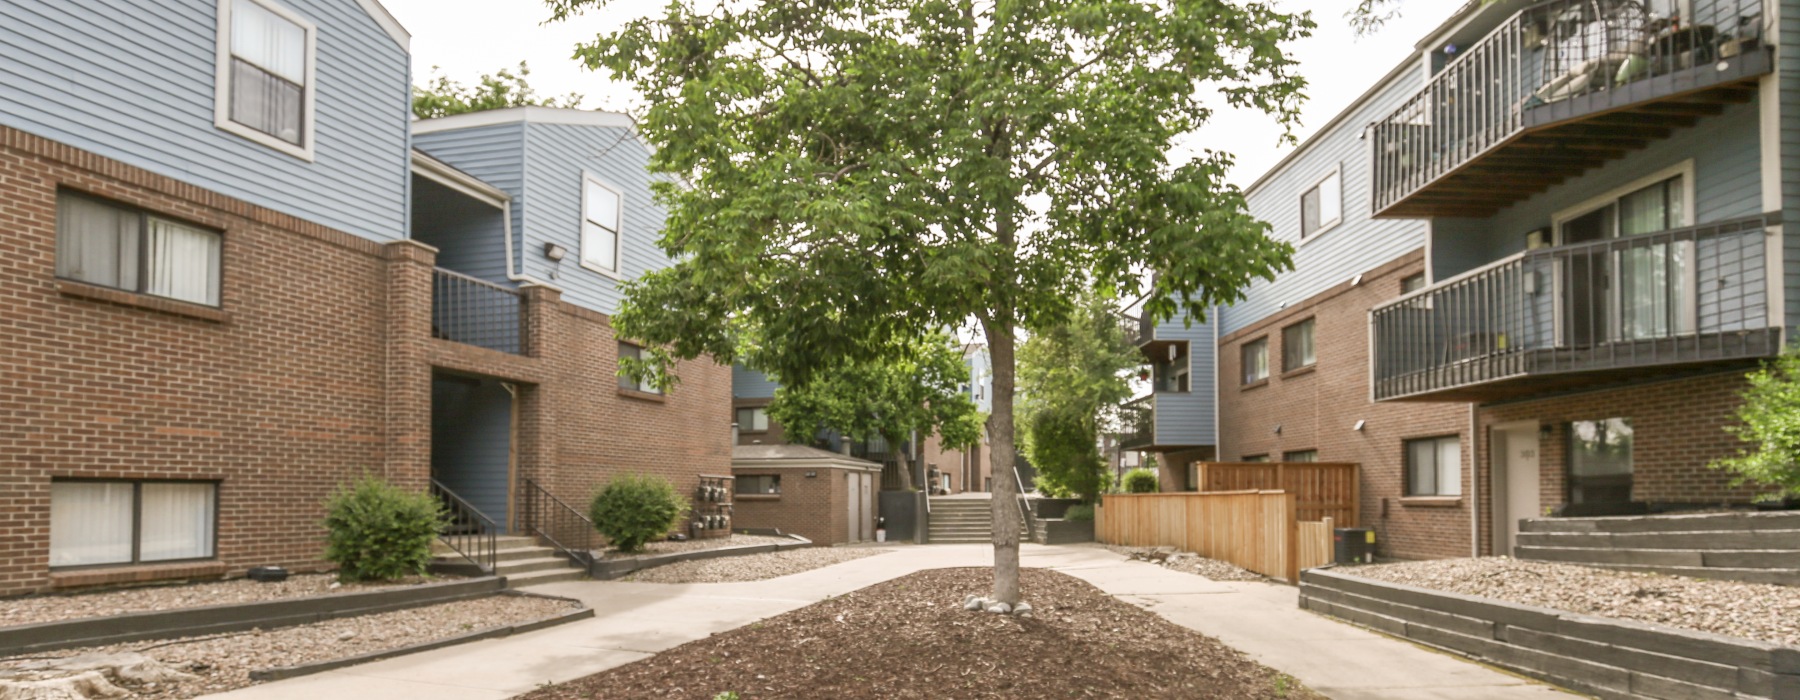 Apartment building exterior with large tree